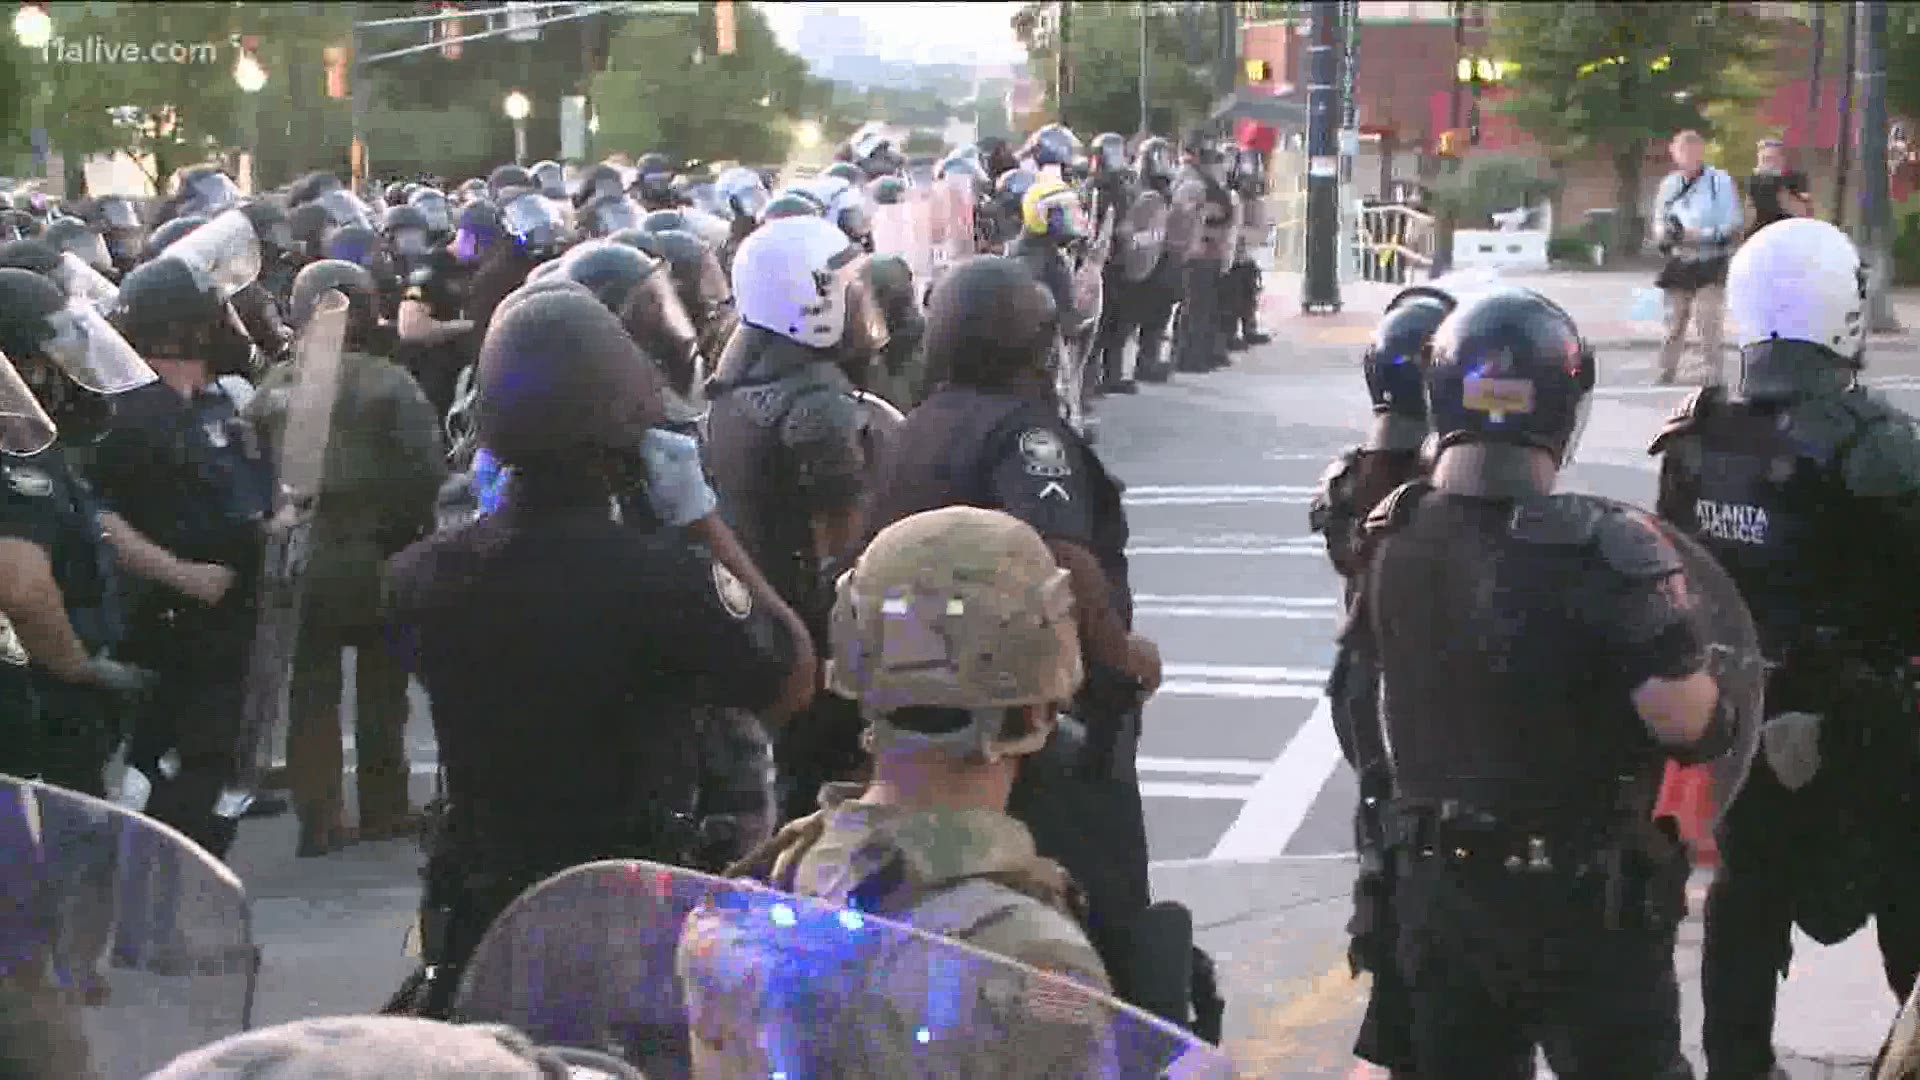 "They get peace and they respond with violence," one person said in reference to police.